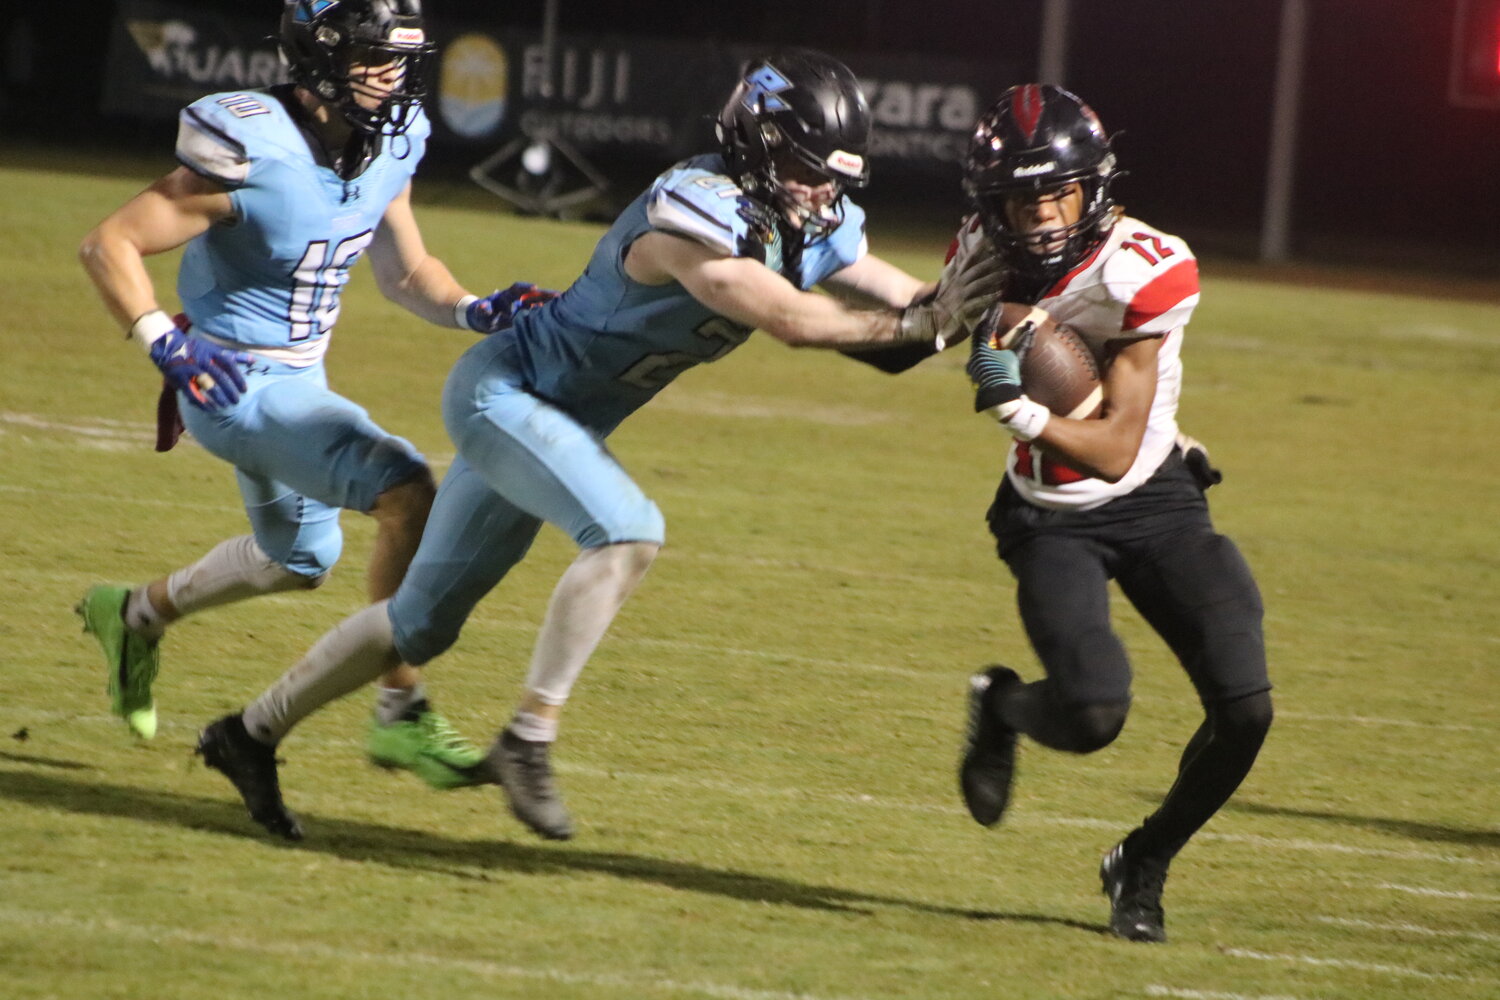 Joe Mahoney pushes a Creekside receiver out of bounds.